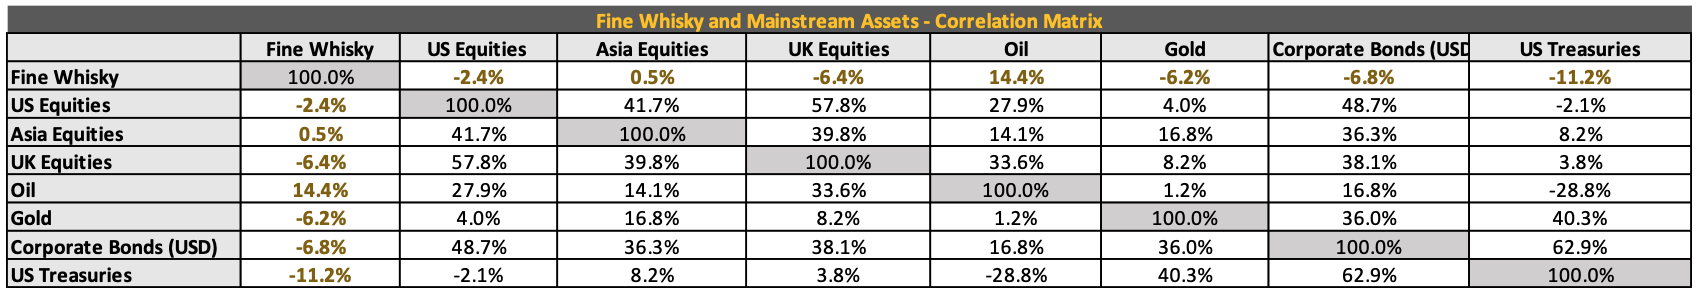 Low Whisky Correlation with Mainstream Assets